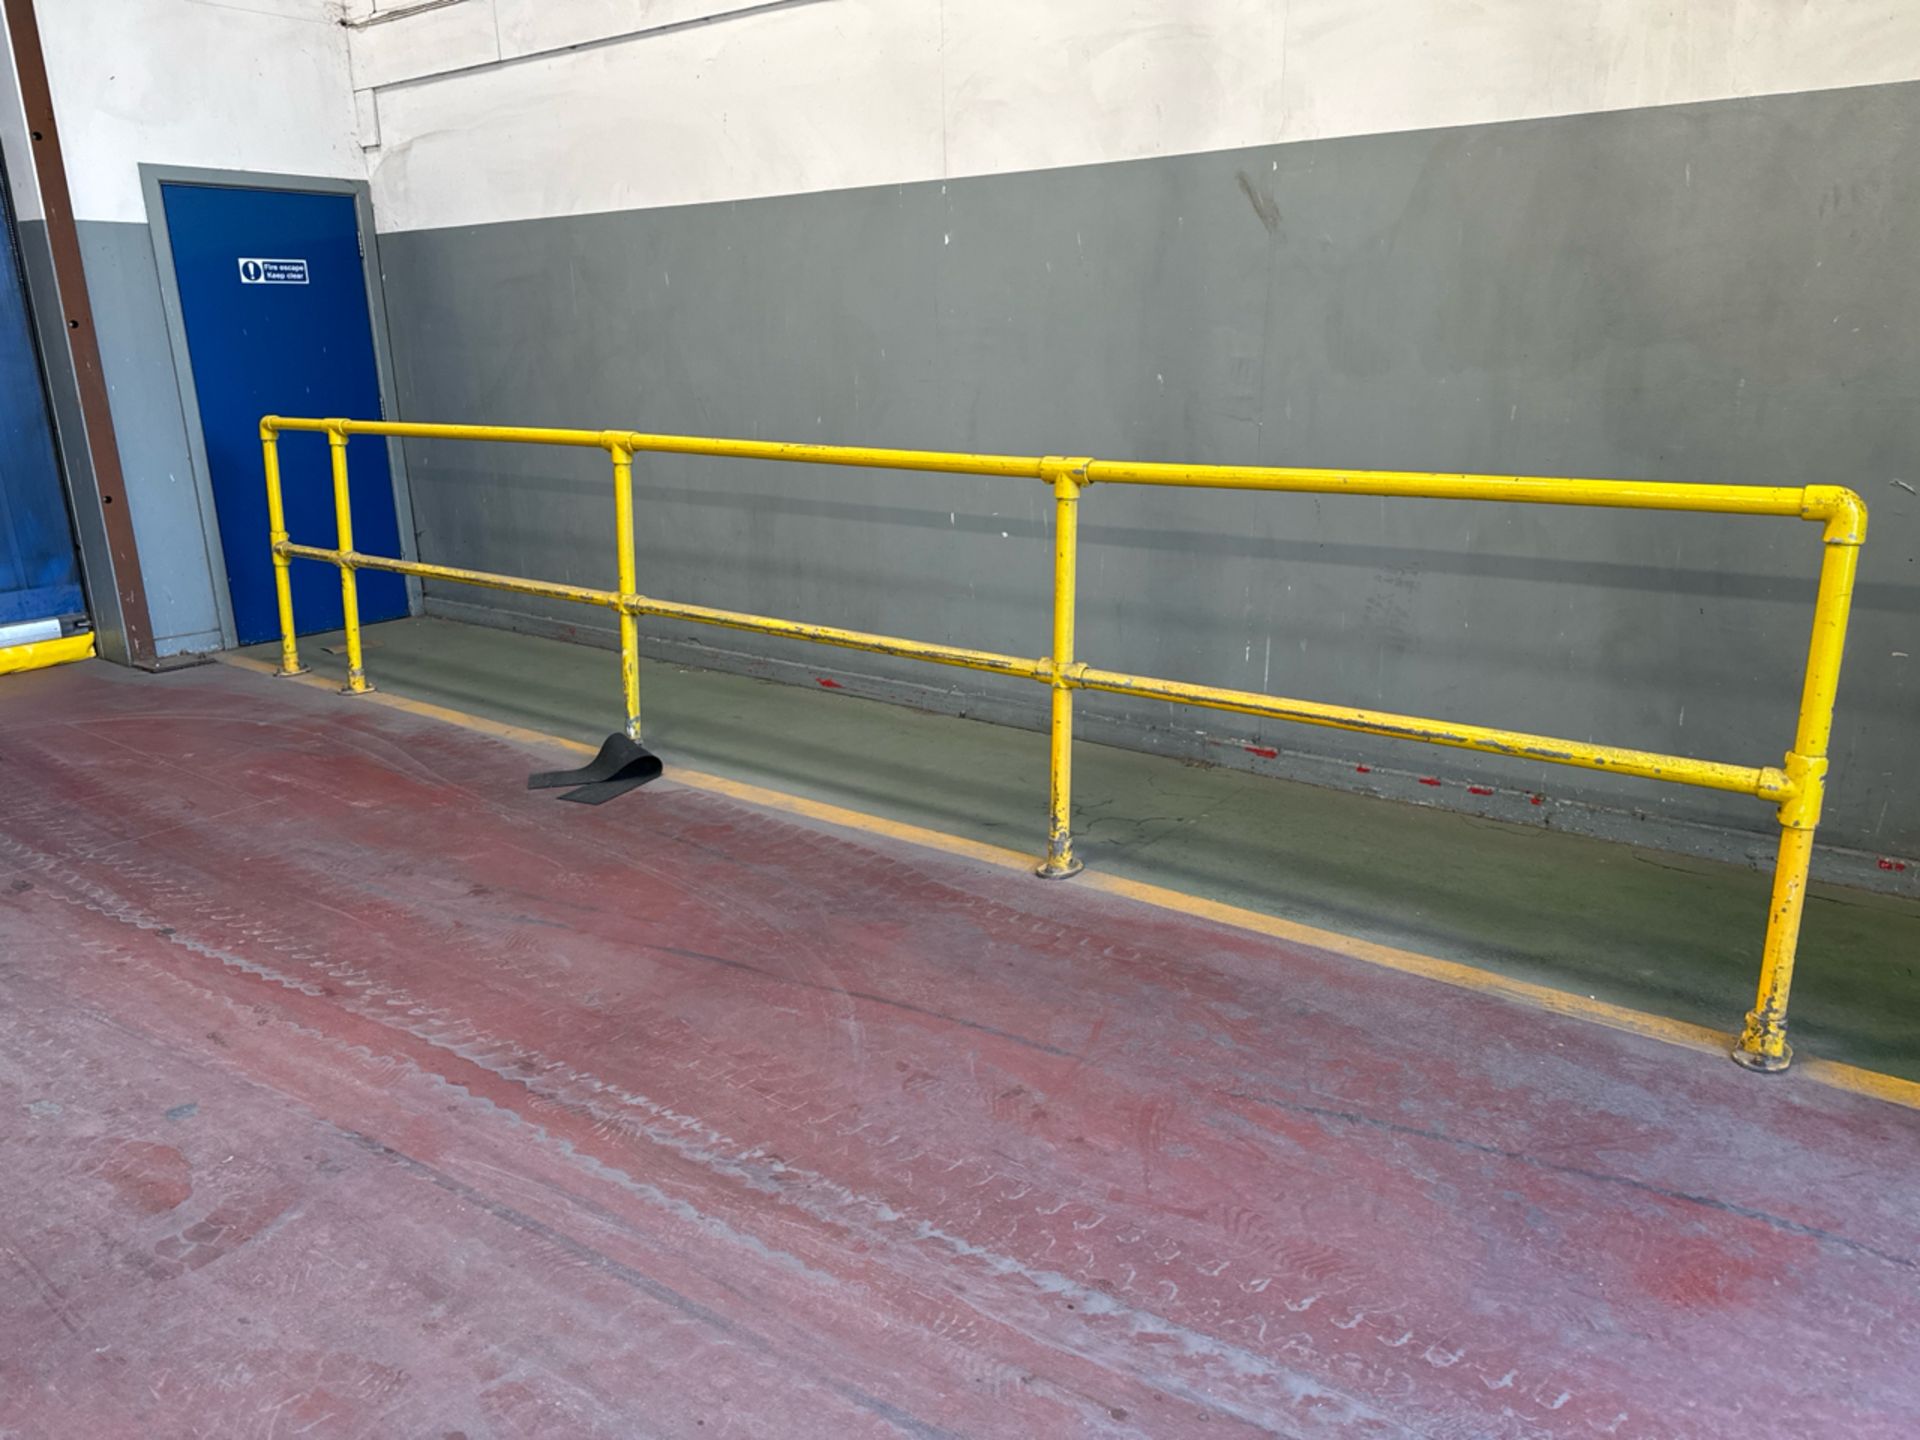 7.5 Meters of Yellow Metal Safety Barriers